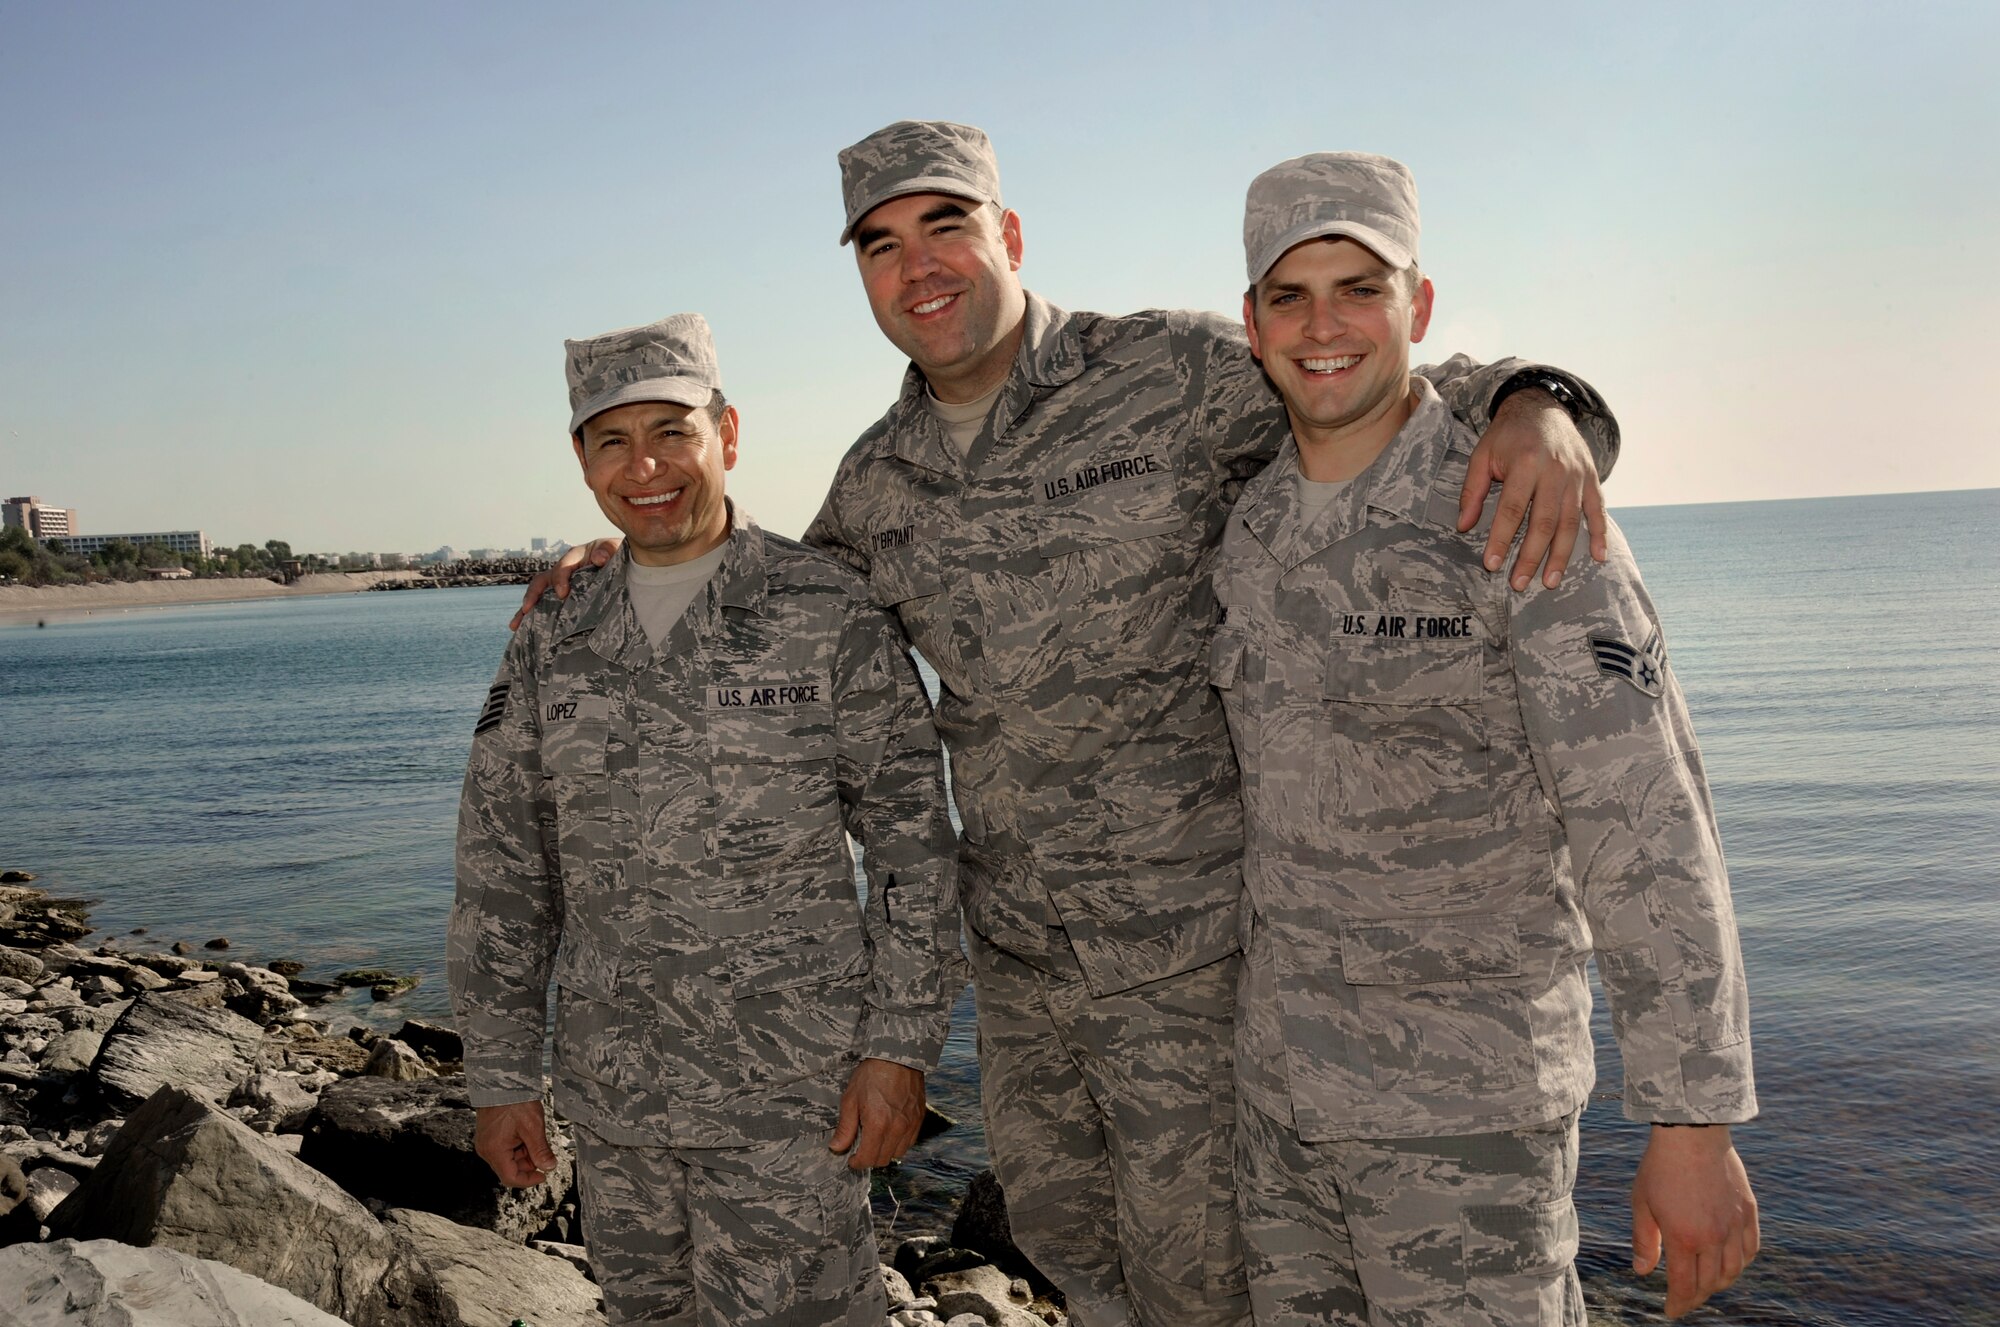 Oregon Air National Guardsmen from the 142nd Fighter Wing Civil Engineer Squadron, Tech. Sgt. Ramon Lopez, left, Senior Airman Tyler O’Bryant, center, and Senior Airman Zachariah Lewis, right, pause for a group photograph along the Black Sea in the City of Mangalia, Romania, May 13, 2015, as part of the U.S. European Command’s (EUCOM) Humanitarian Civic Assistance Program (HCA). The three Airmen on deployment in Romania also recently finished a deployment in Quang Ngai Province, Vietnam, during Operation Pacific Angel, a joint and combined humanitarian assistance operation led by the U.S. Pacific Air Forces. (U.S. Air National Guard photo by Tech. Sgt. John Hughel, 142nd Fighter Wing Public Affairs/Released)